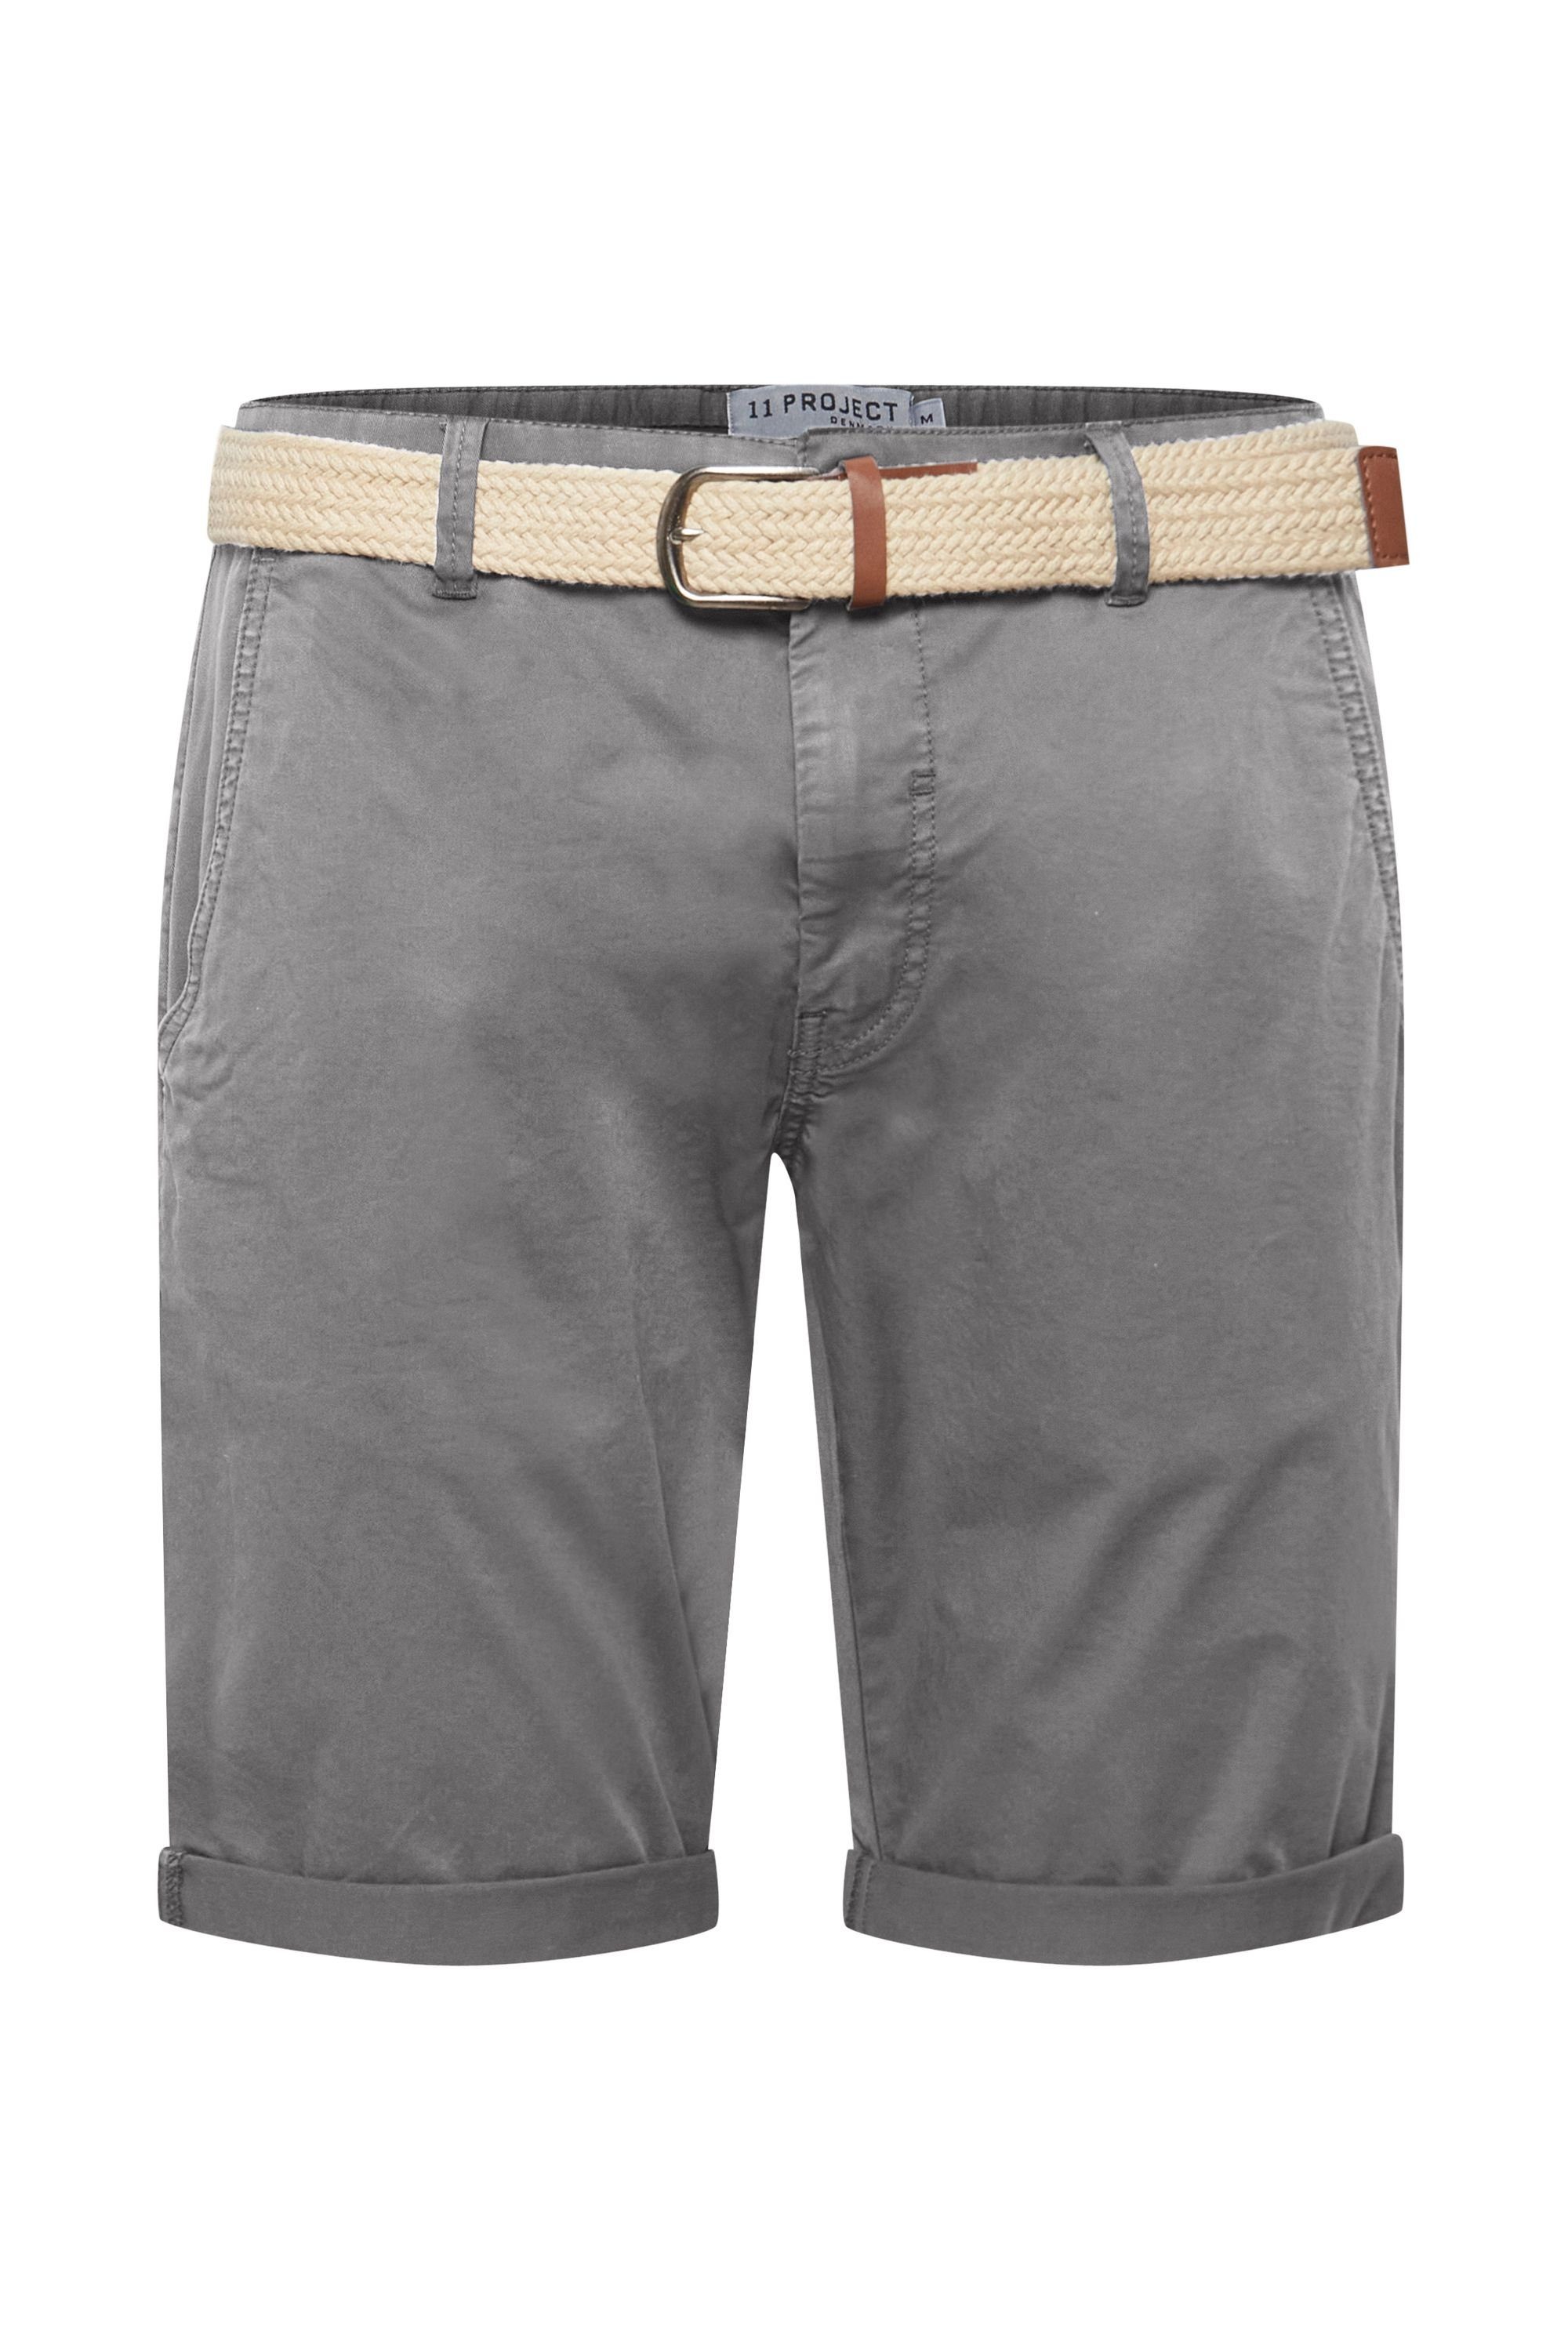 Project PRFribus Pearl Project Chinoshorts 11 Smoked 11